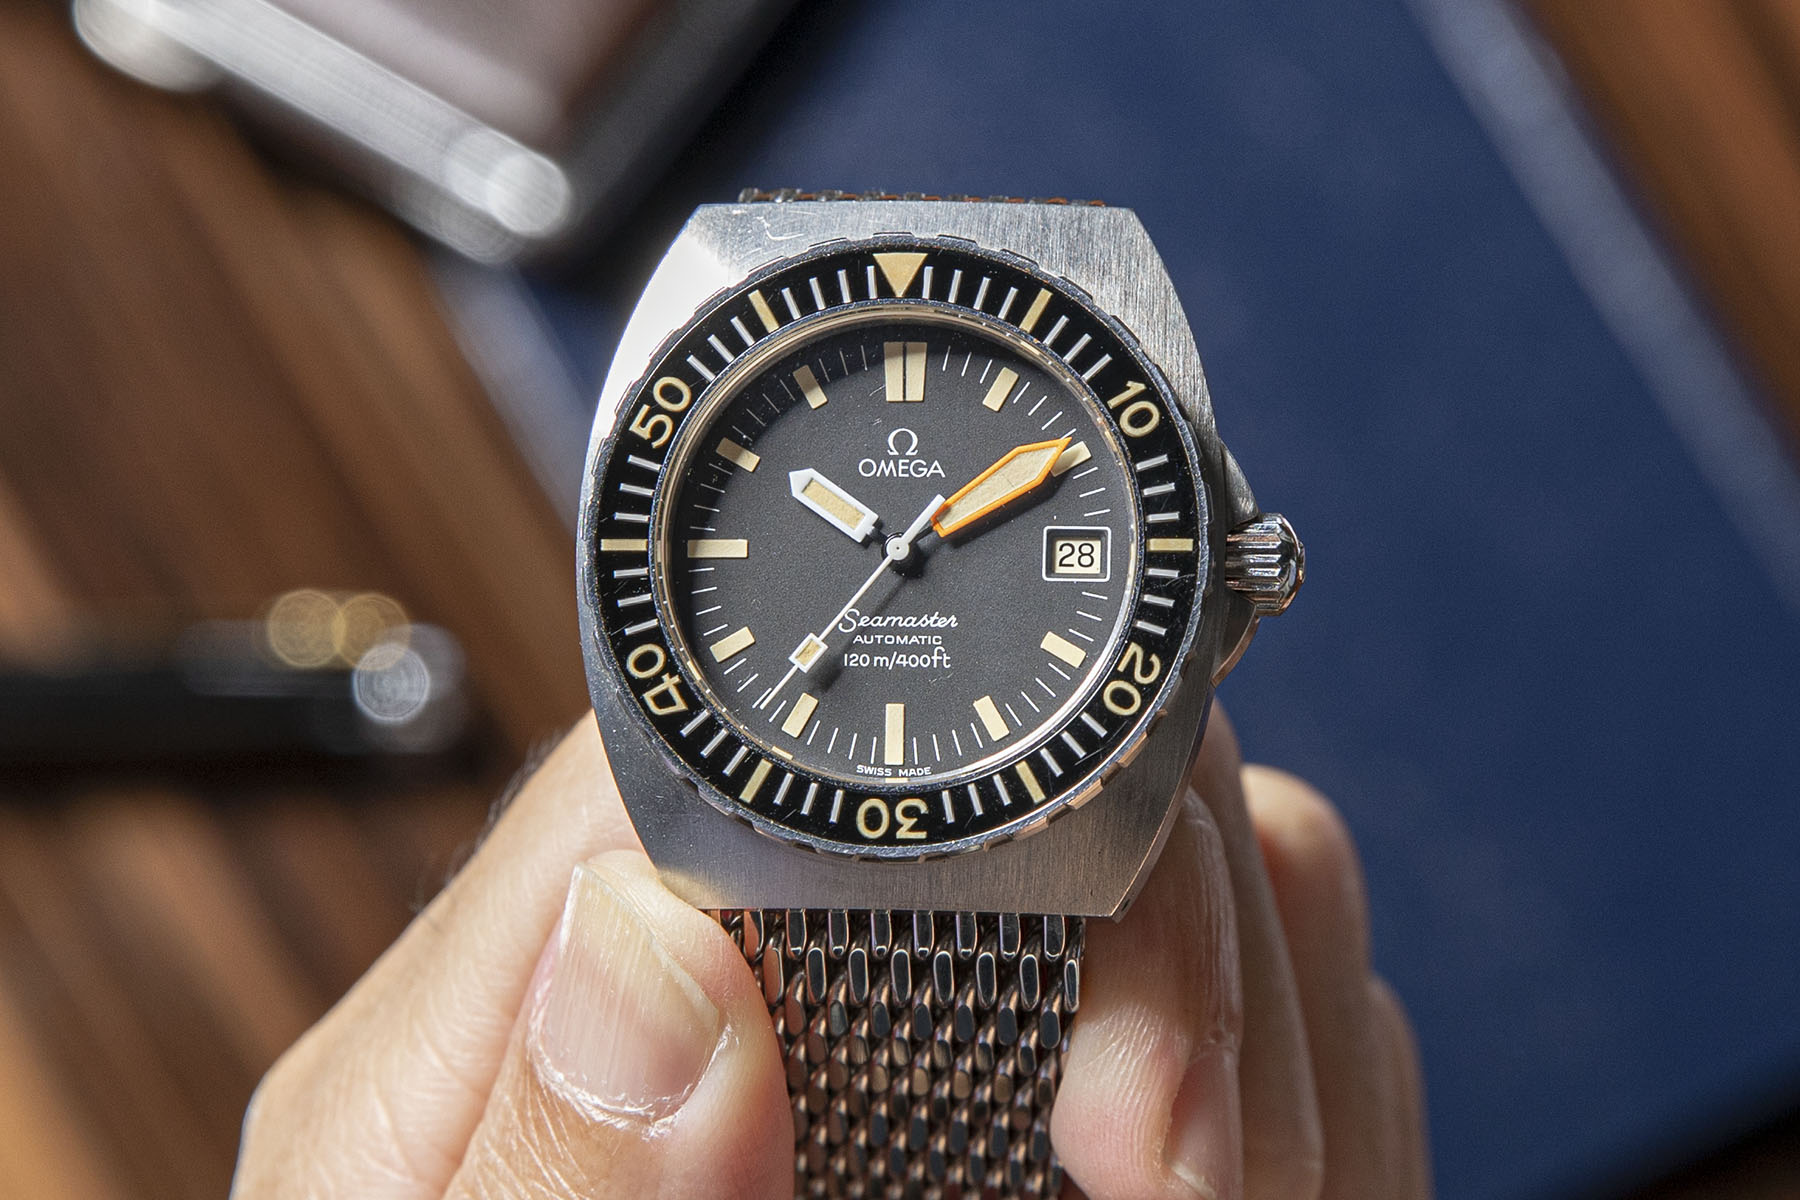 40mm Omega Seamaster 120 'Baby Proplof' with Orange Minute Hand ref. ST 166.0250, Circa mid-1970s (©Revolution)